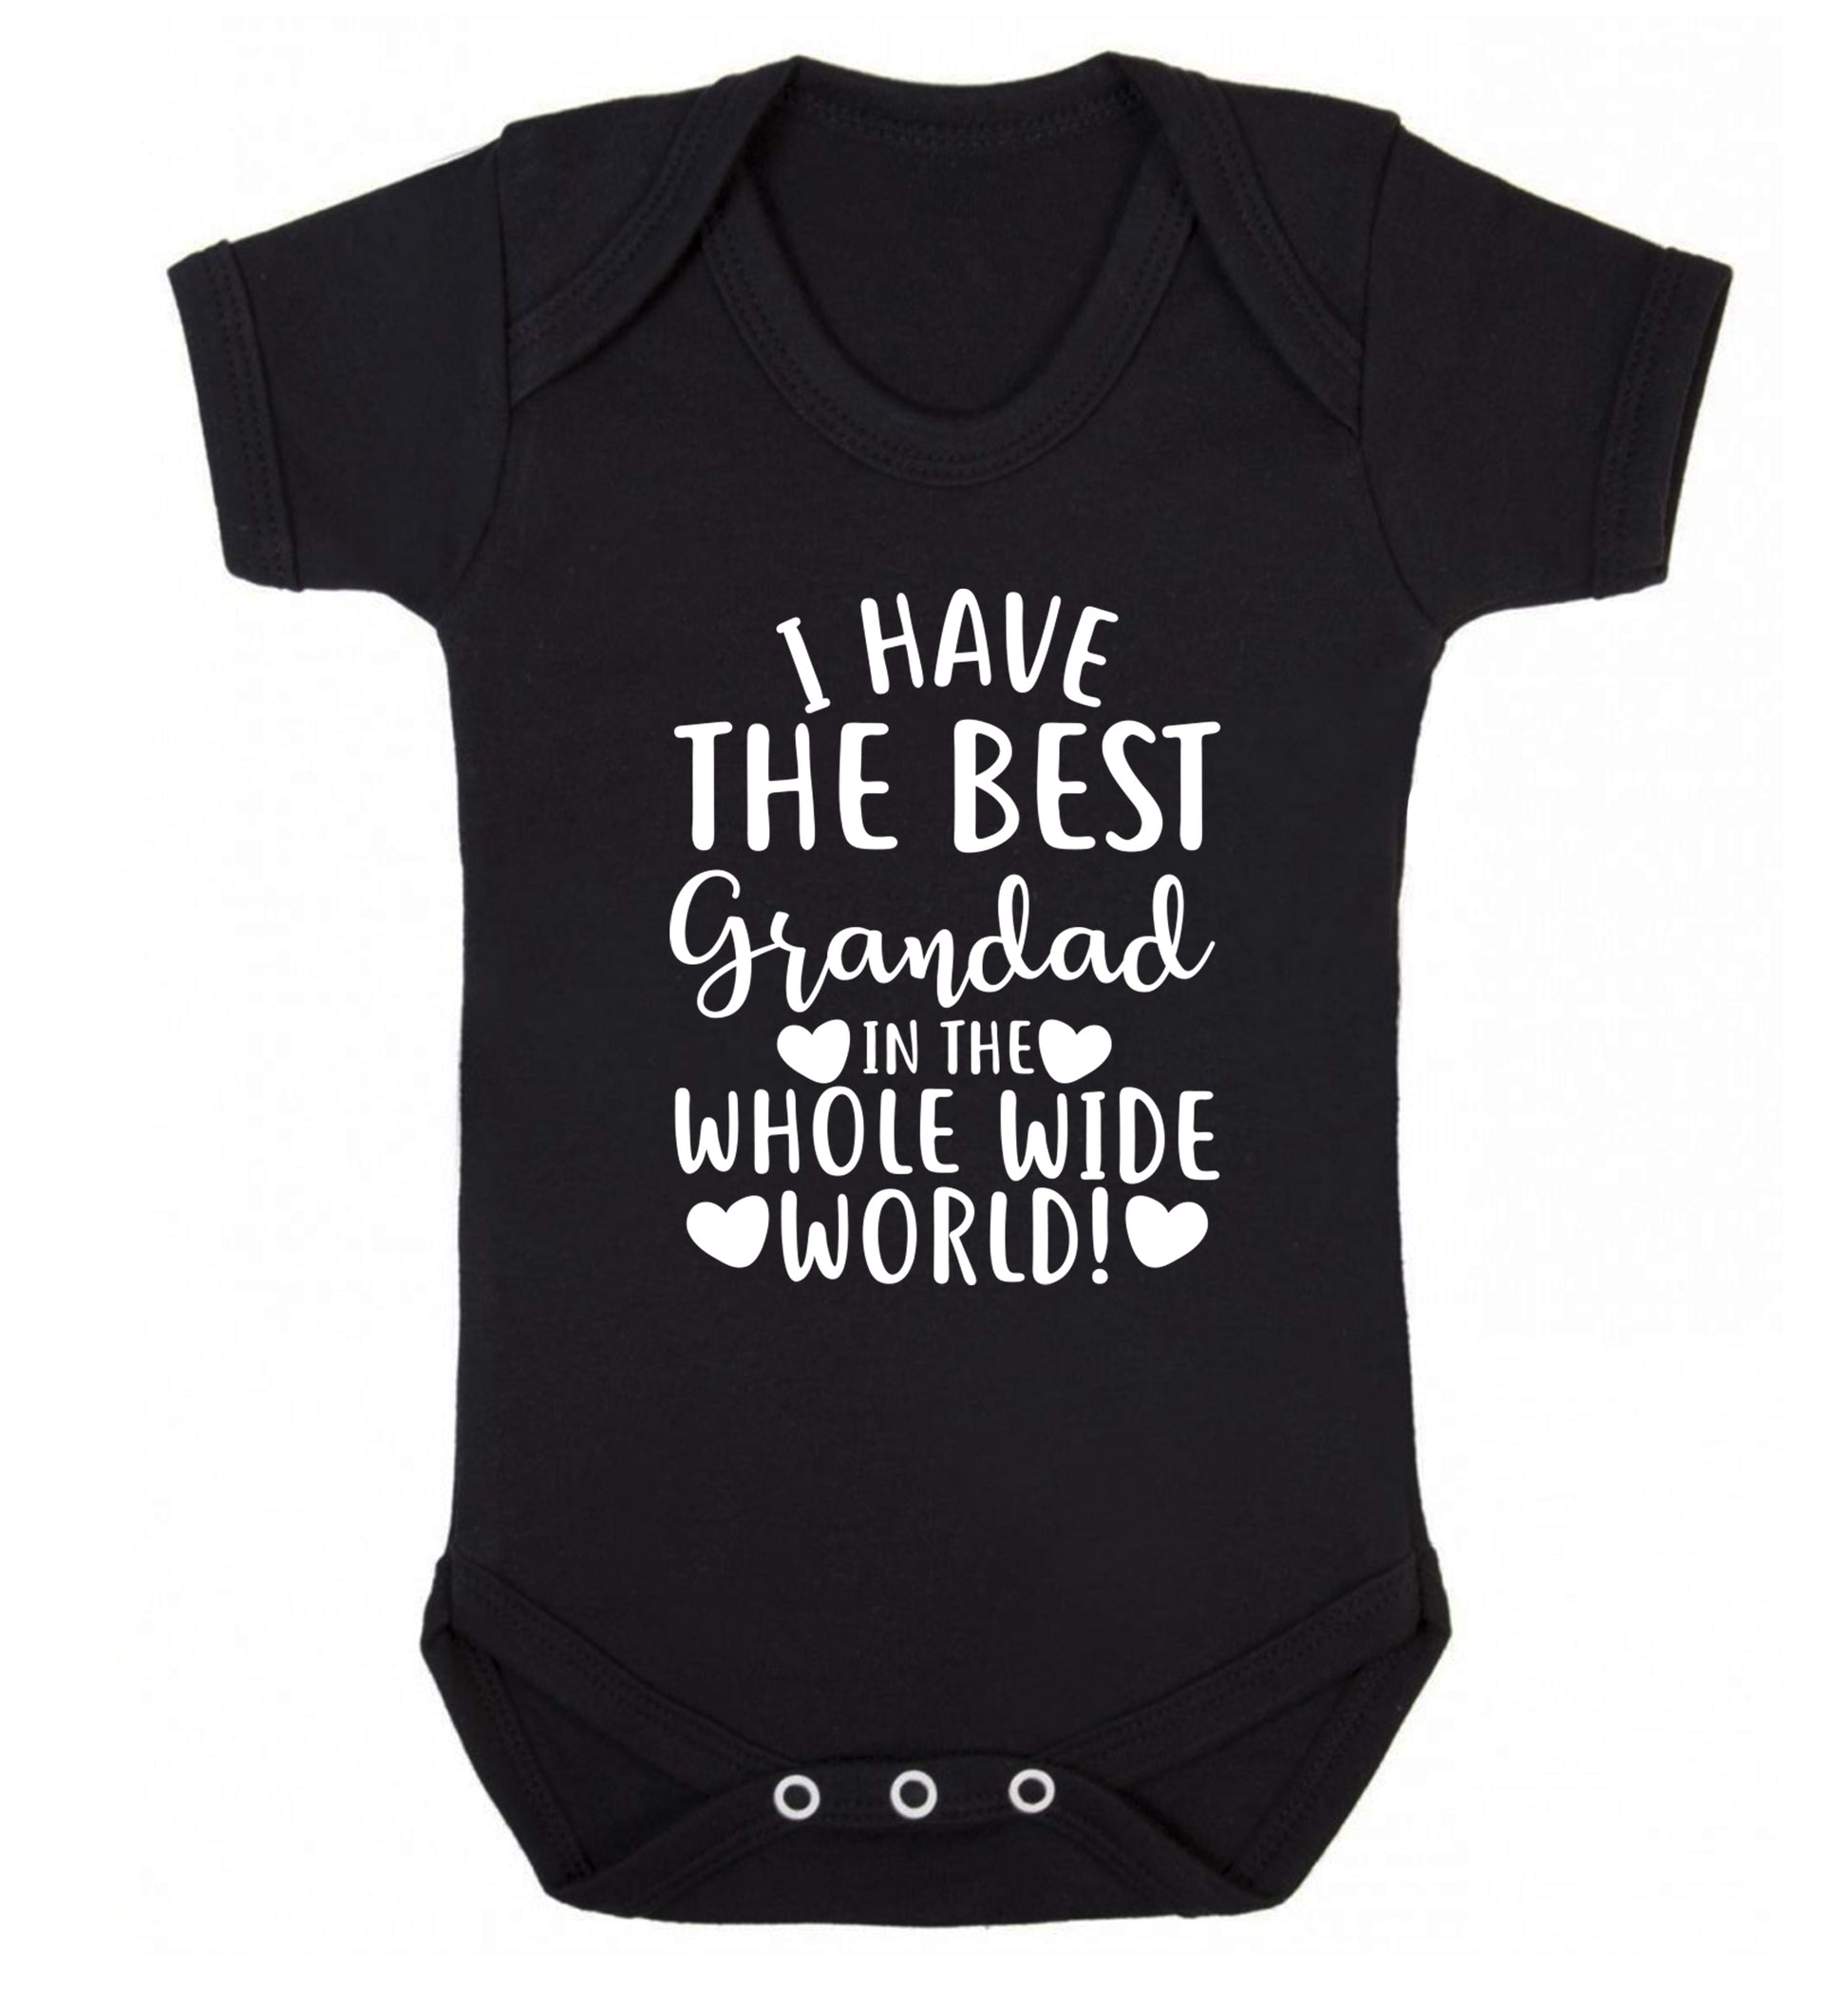 I have the best grandad in the whole wide world! Baby Vest black 18-24 months